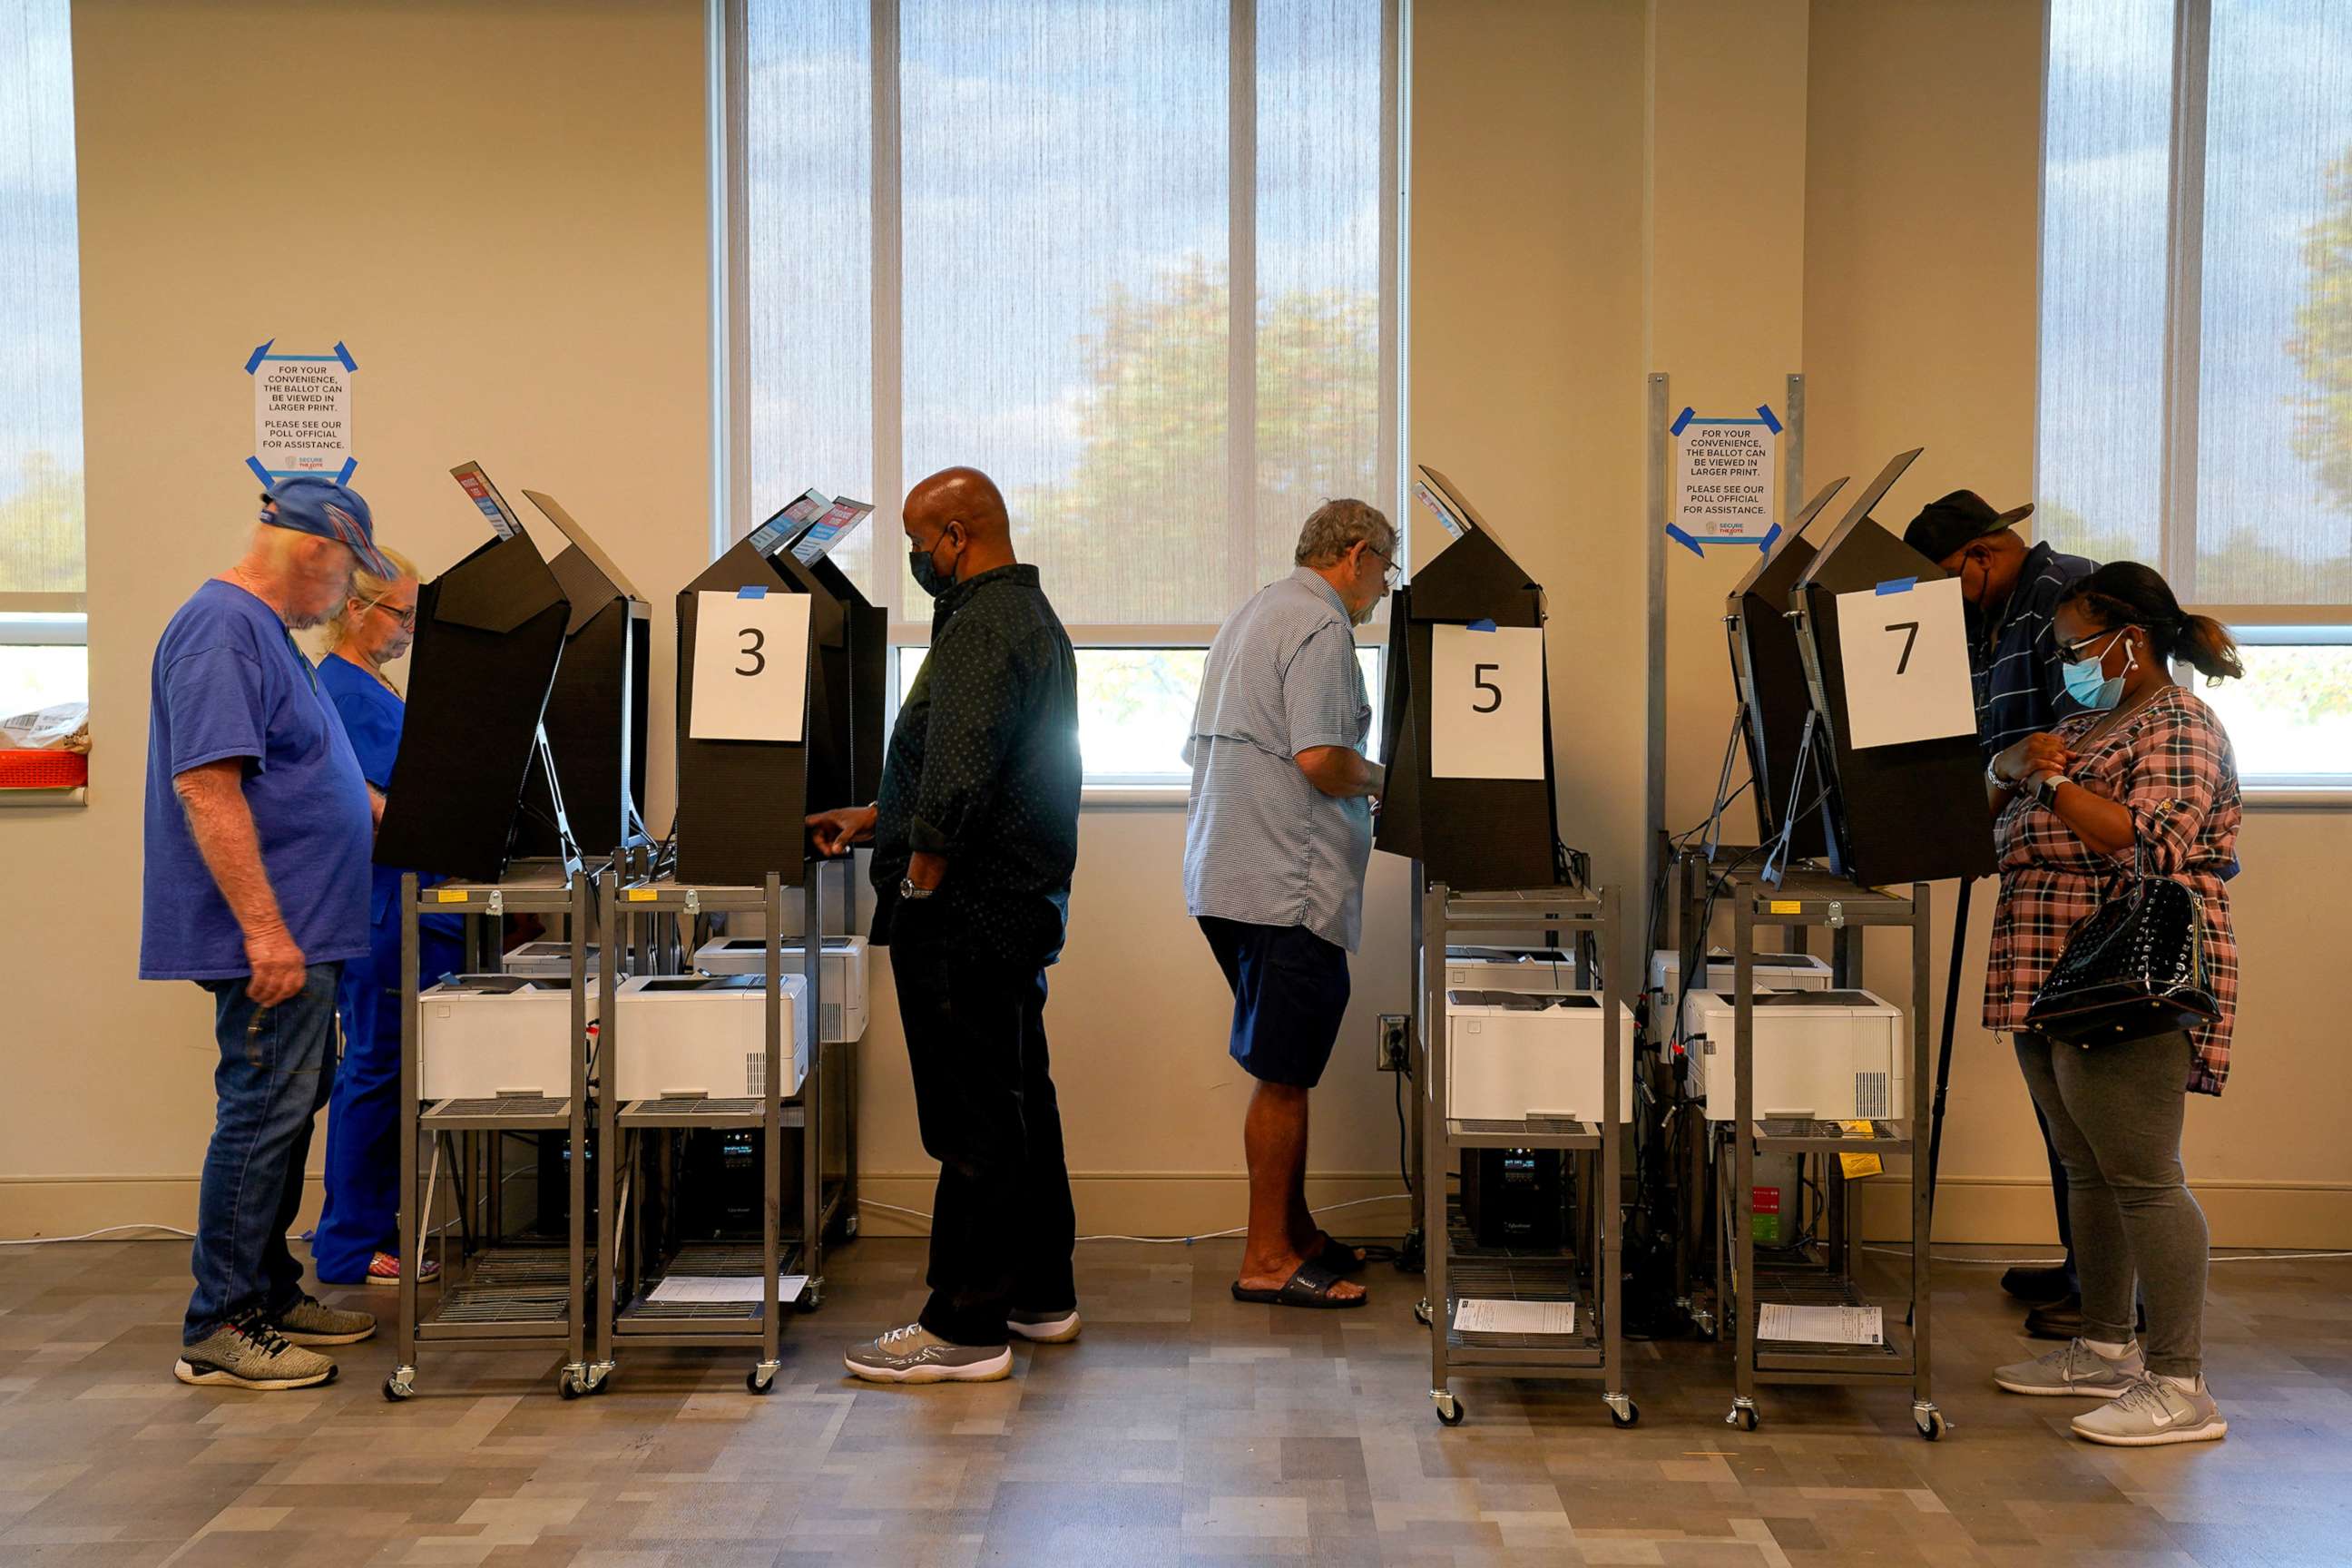 PHOTO: People use voting machines to fill out and cast their ballots as early voting begins for the midterm elections at the Citizens Service Center in Columbus, Ga., Oct. 17, 2022.